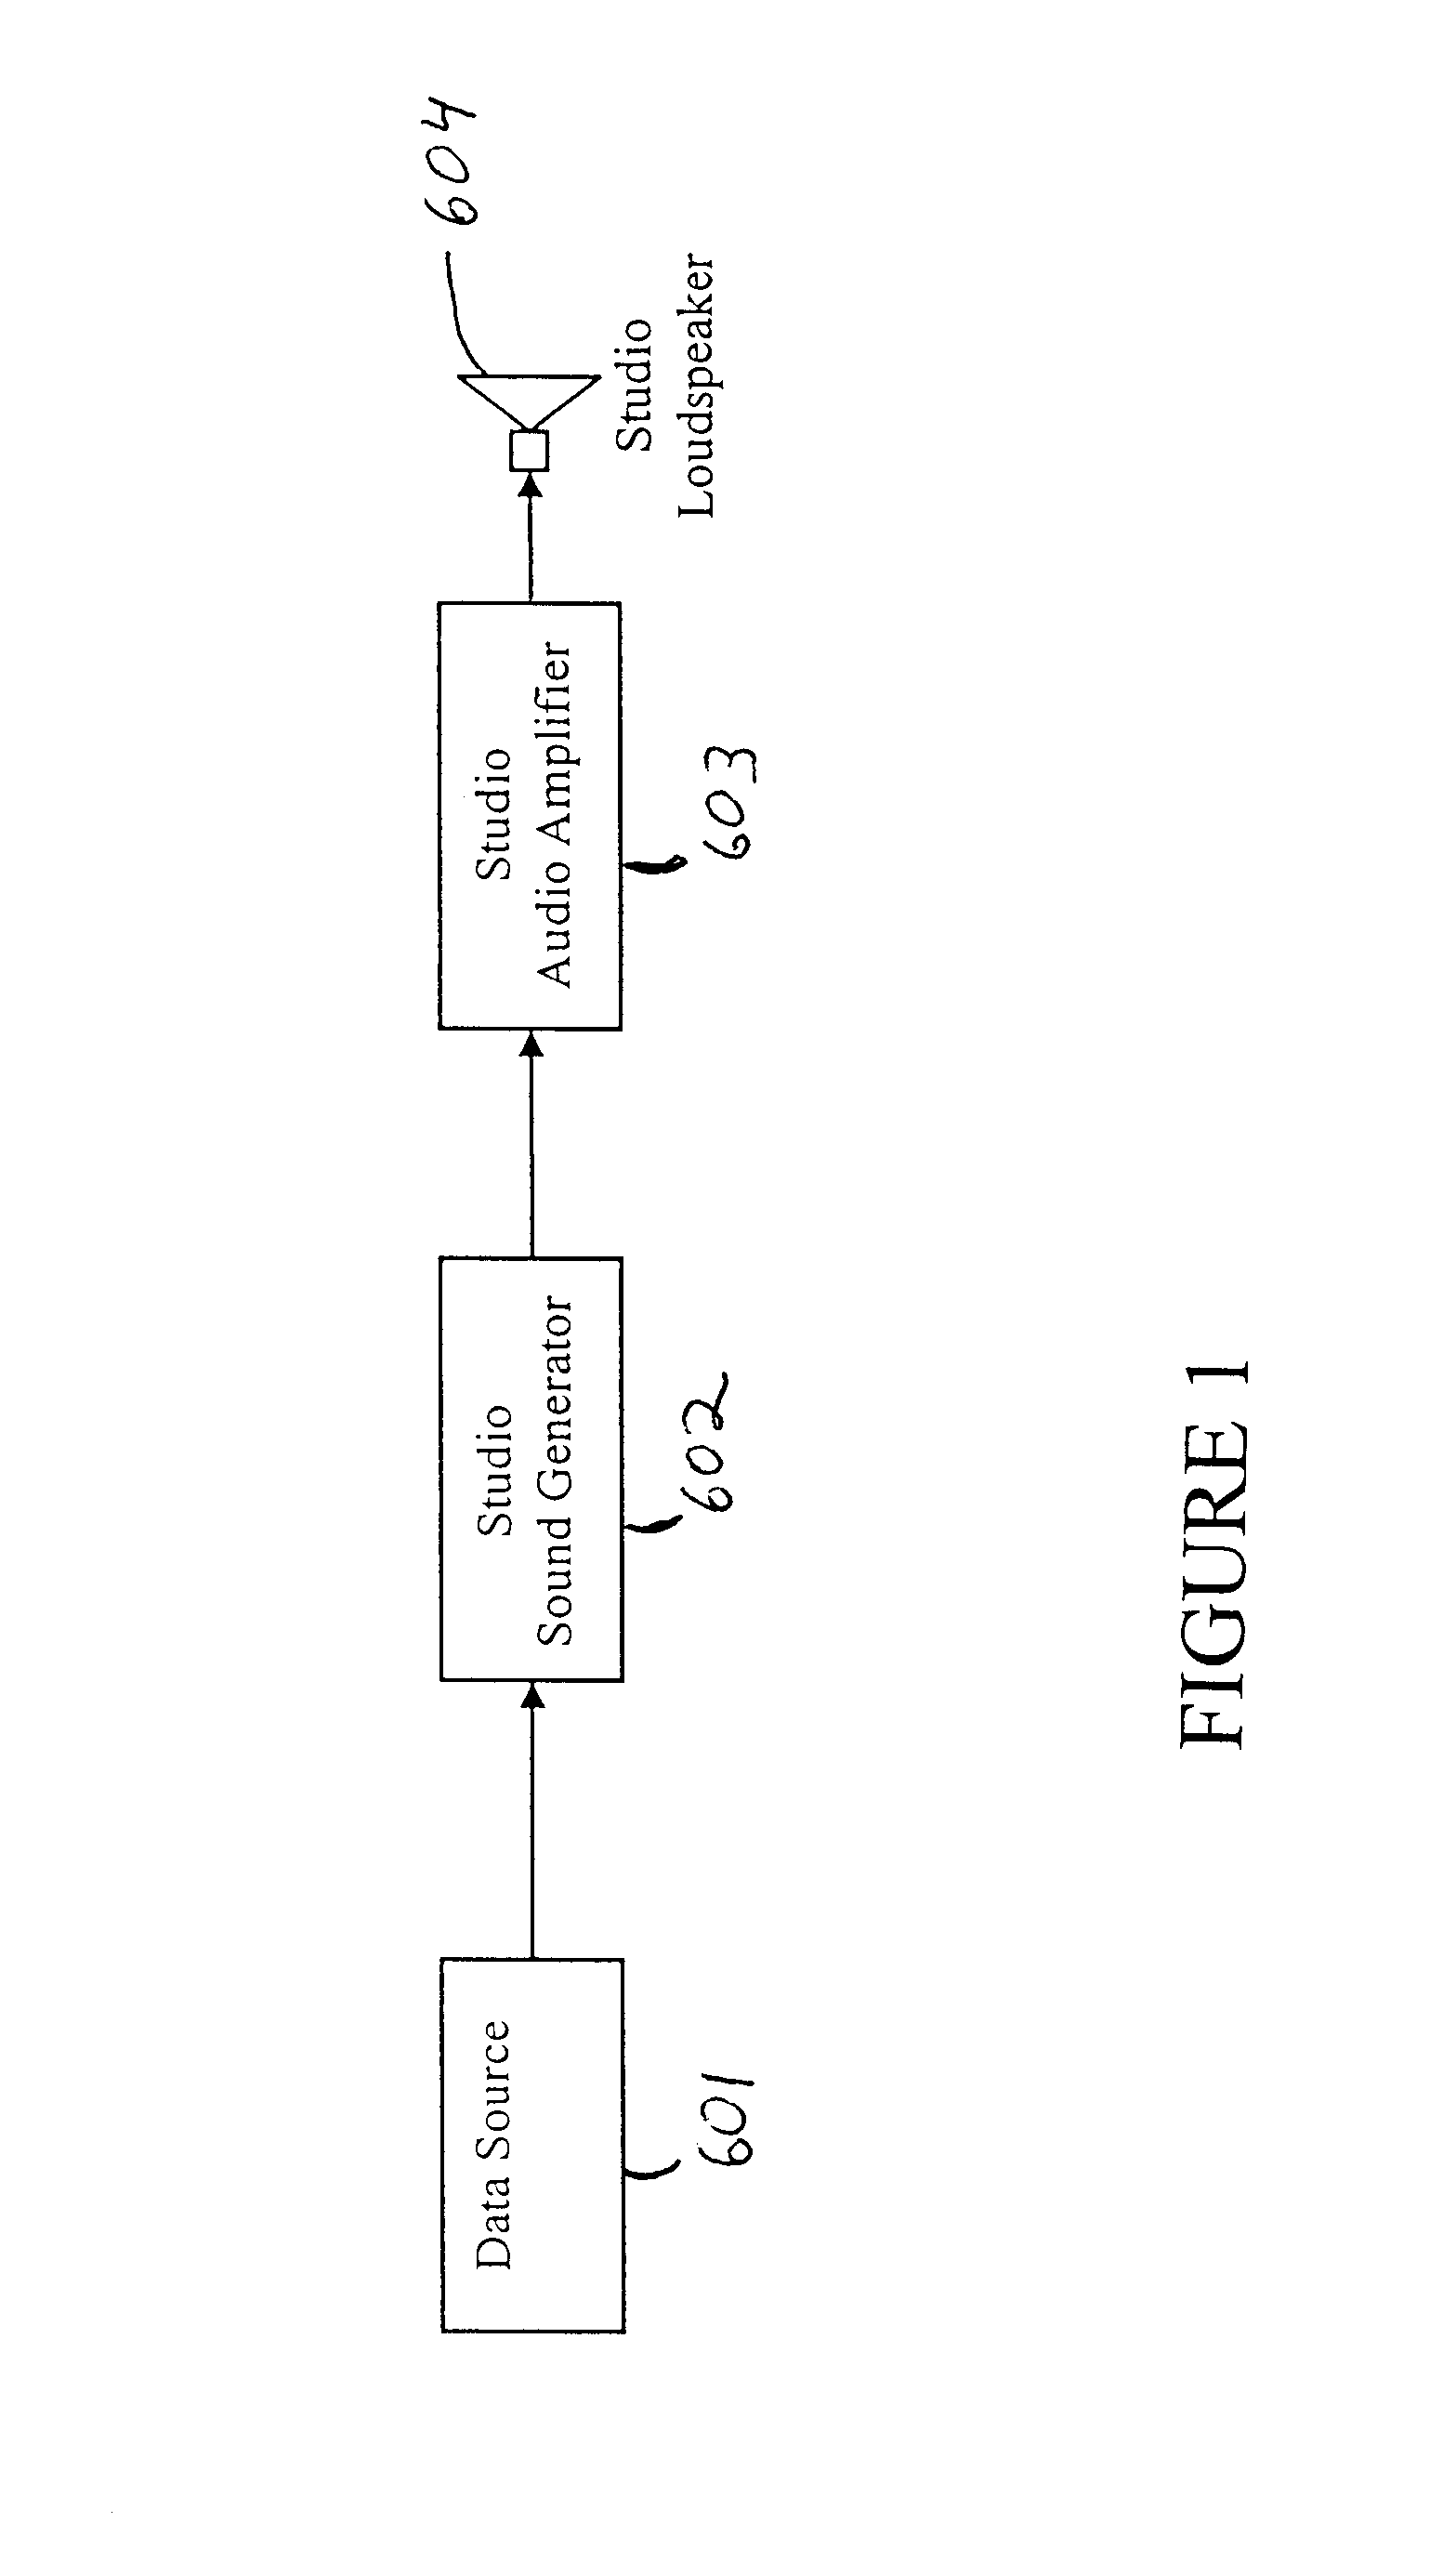 Method and apparatus for audio broadcast of enhanced musical instrument digital interface (MIDI) data formats for control of a sound generator to create music, lyrics, and speech